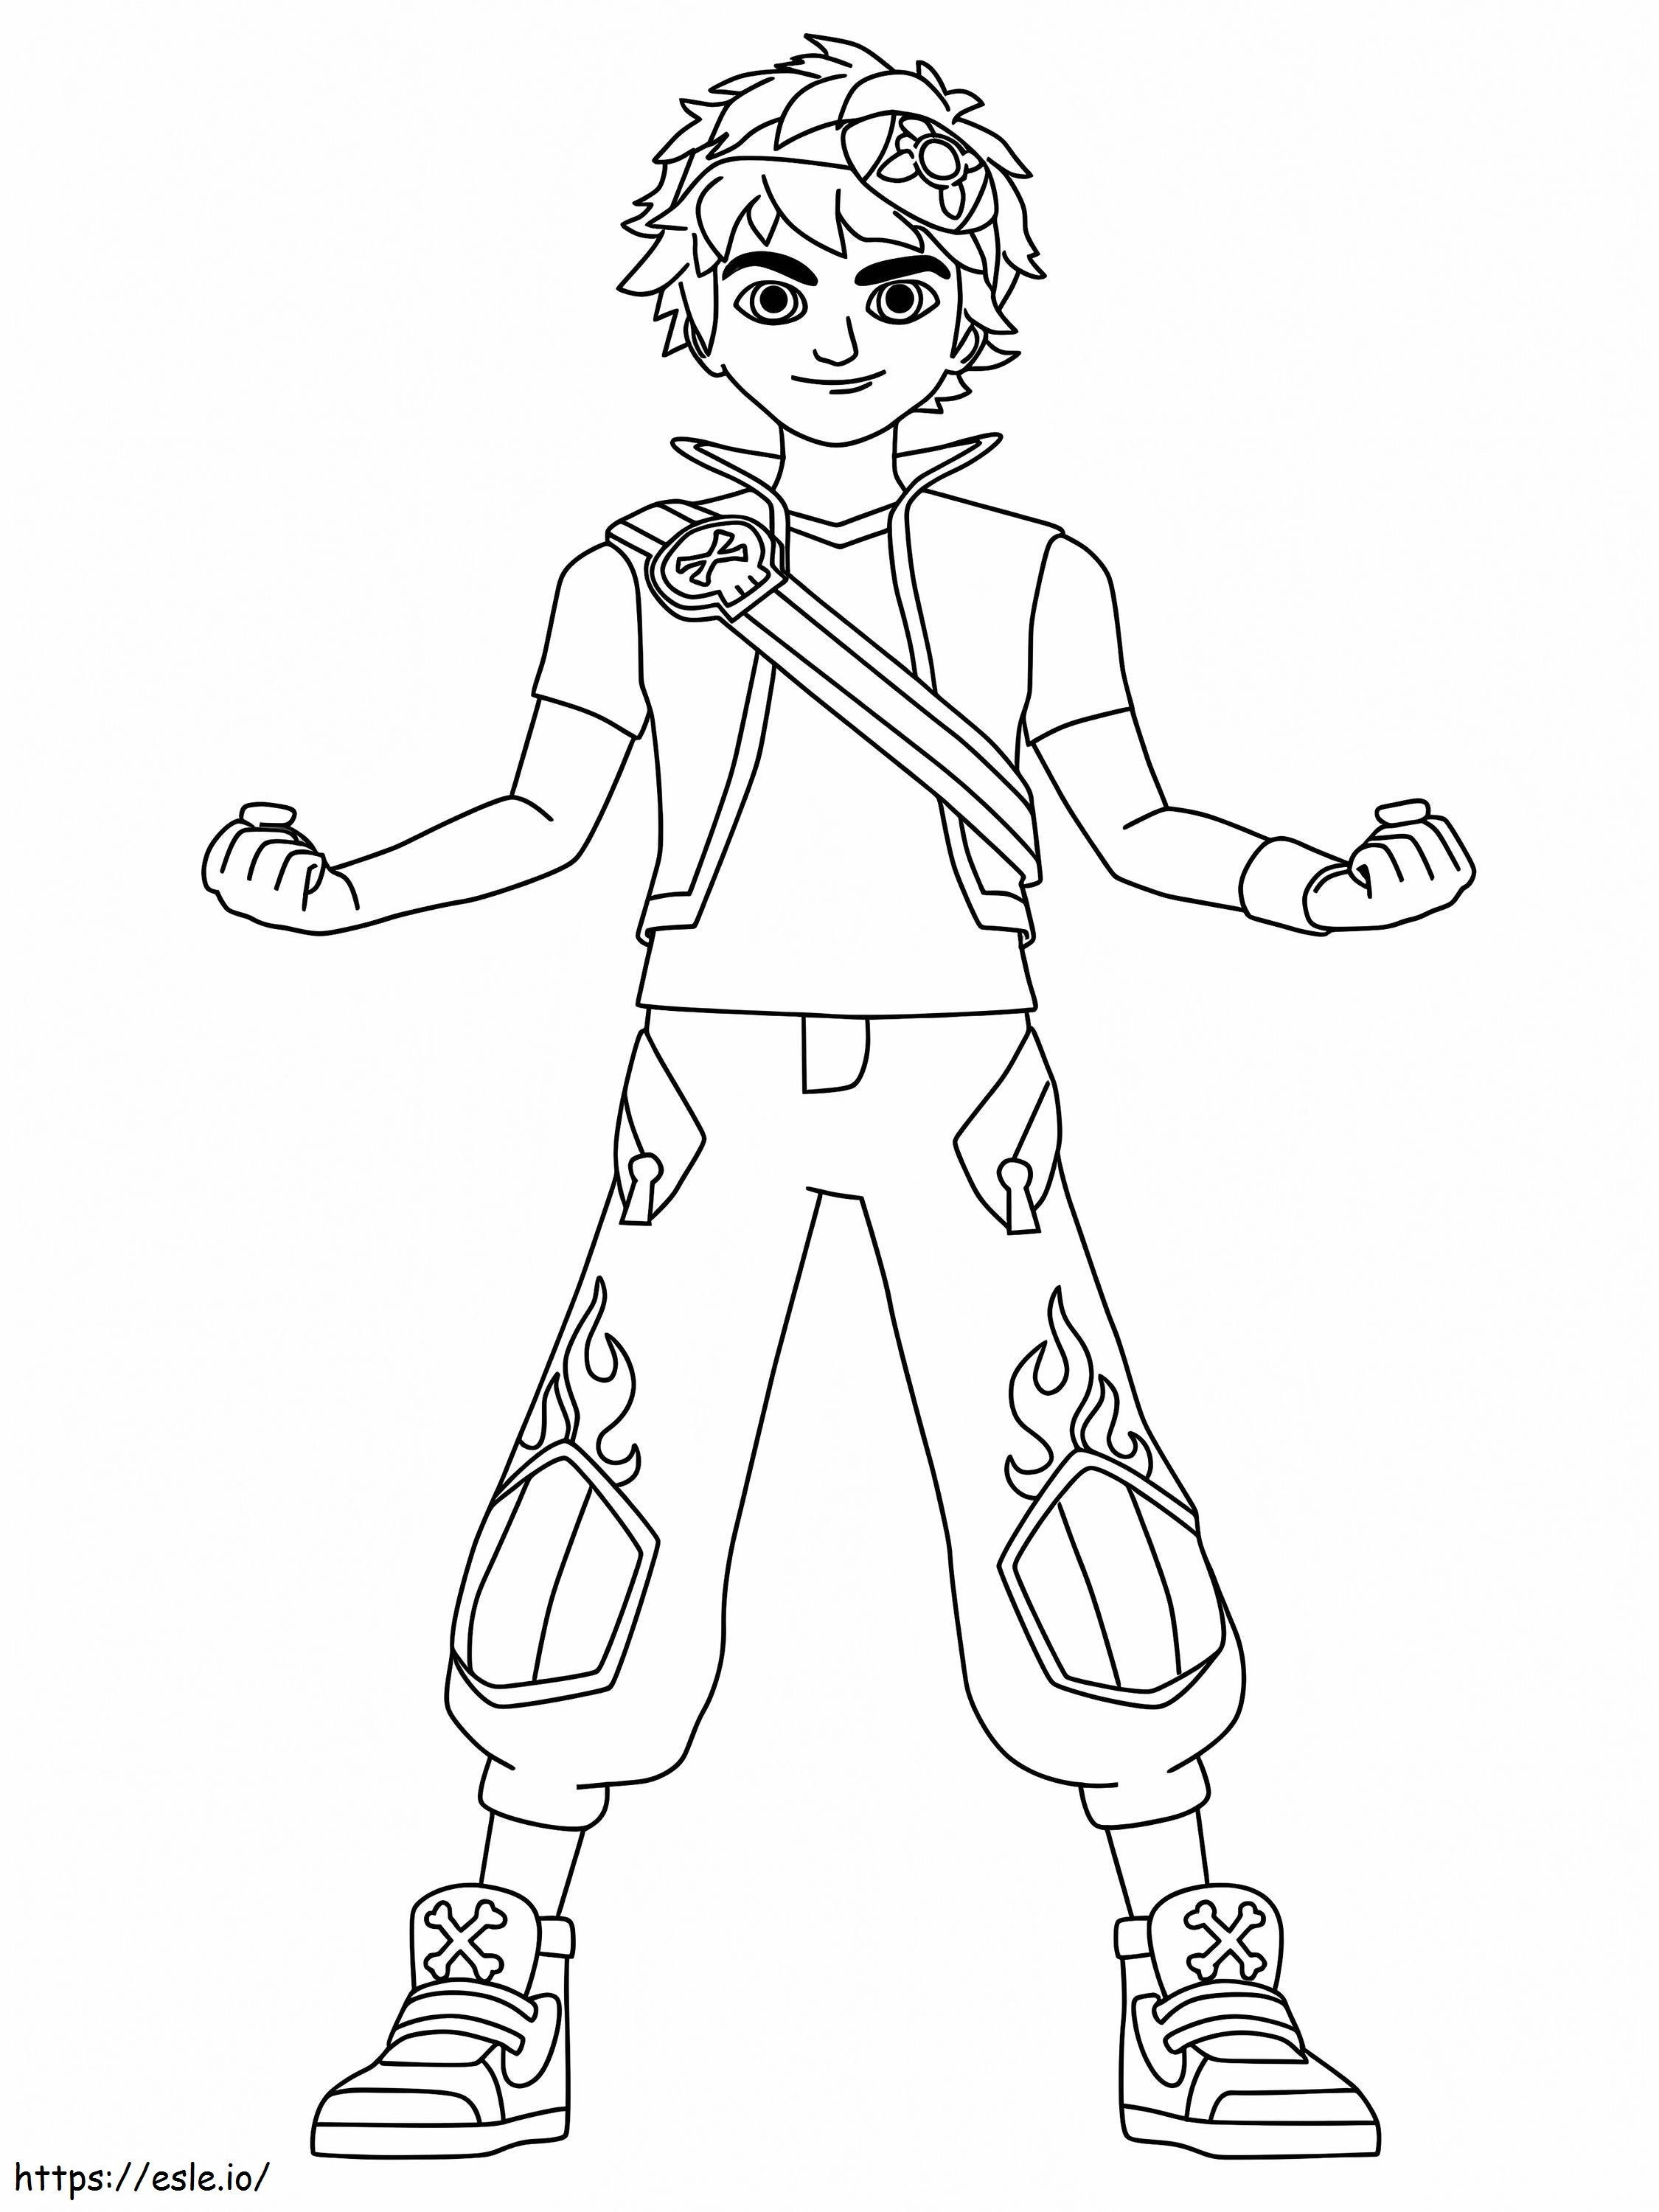 Cool Zak Storm coloring page